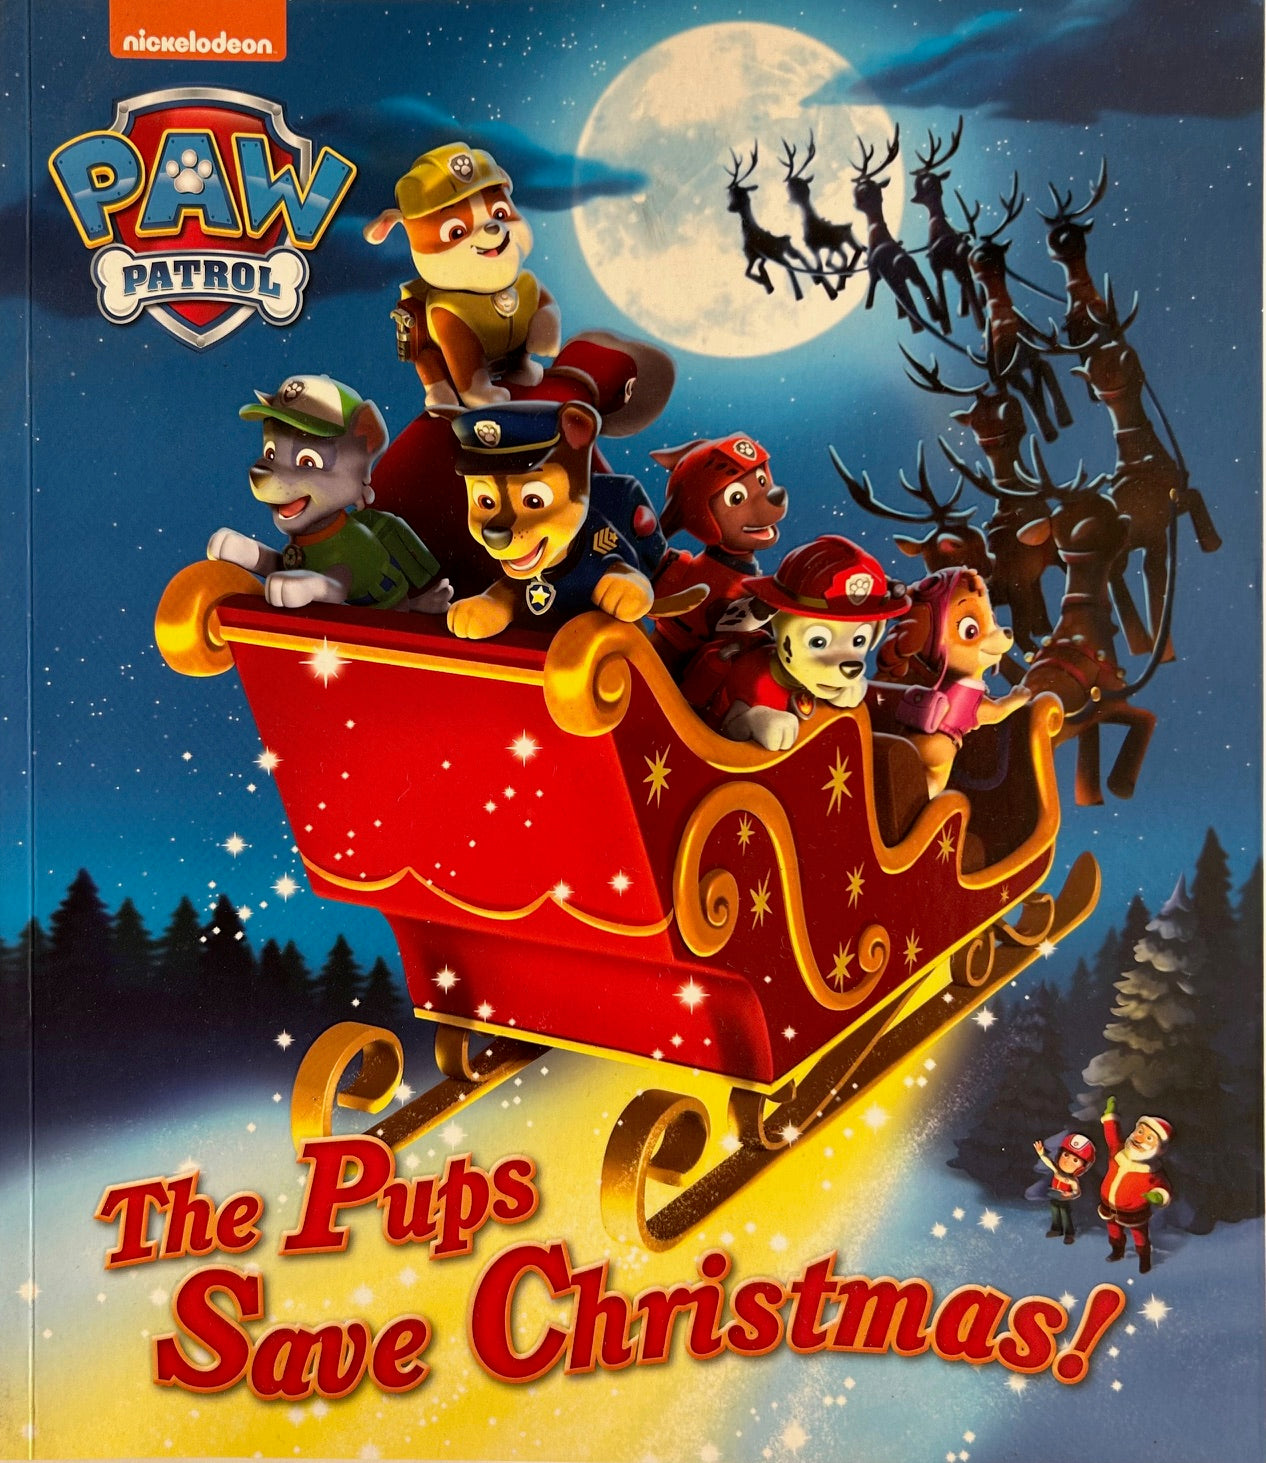 Nickelodeon Books - PAW PATROL The Pups Save Christmas by Parragon